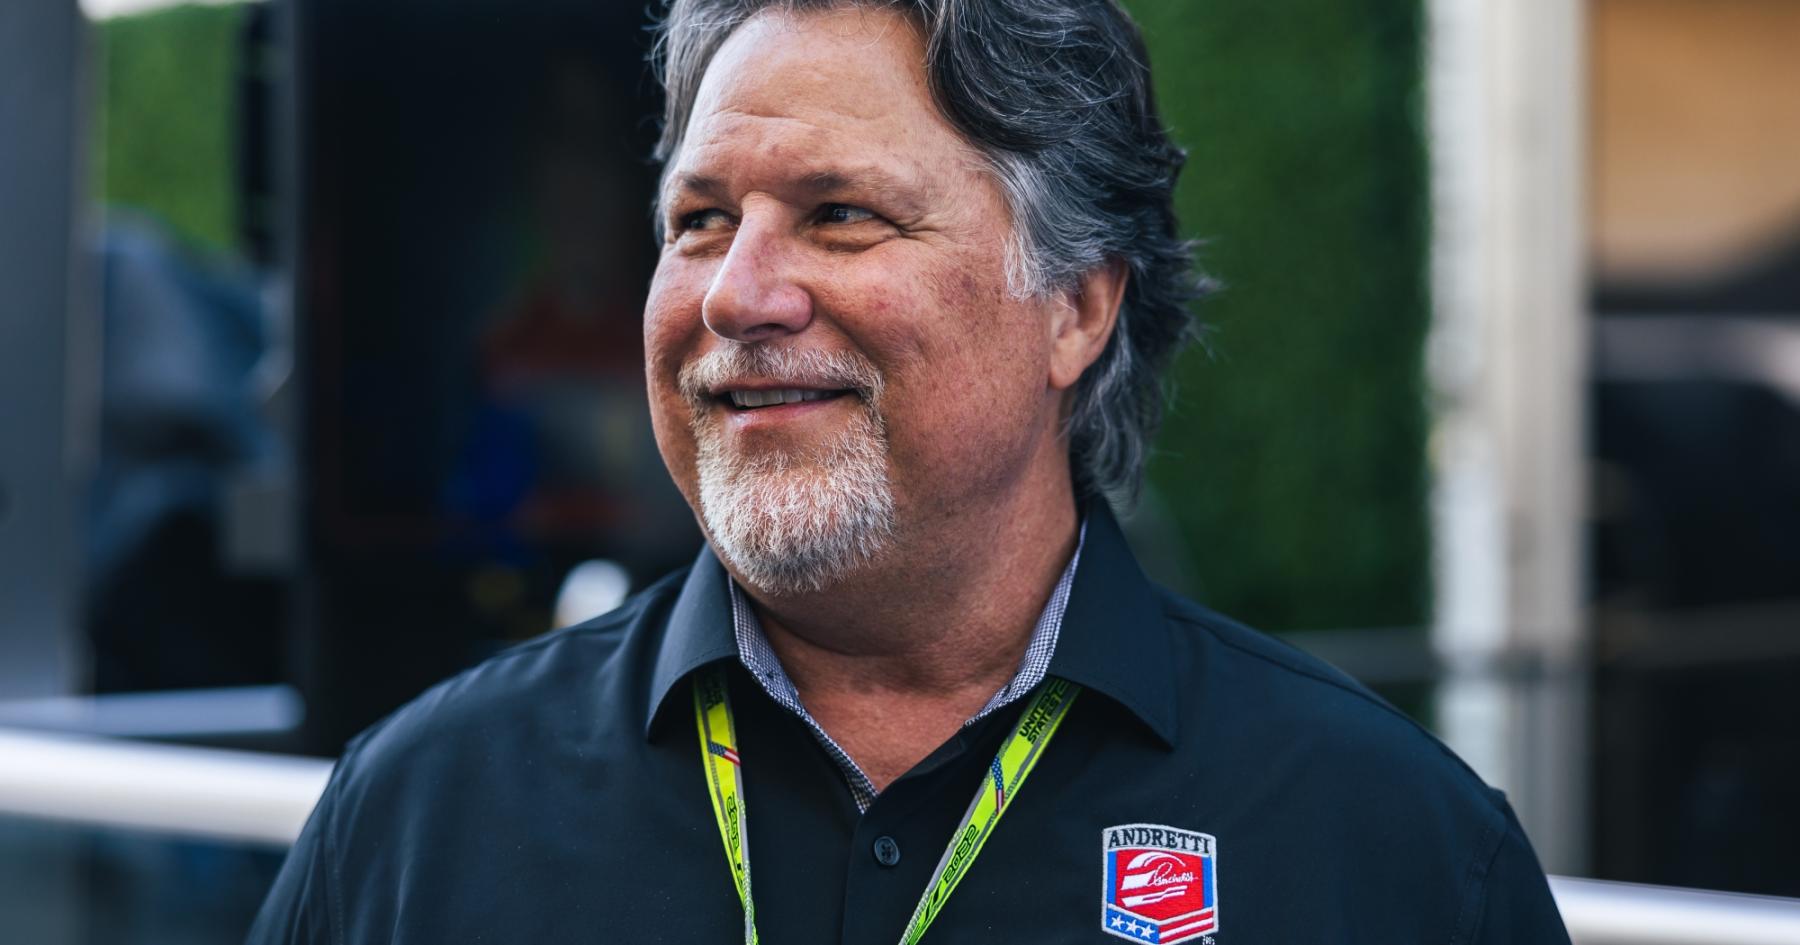 Resilience in Action: Andretti Racing Team's Determined Resolve to Prevail